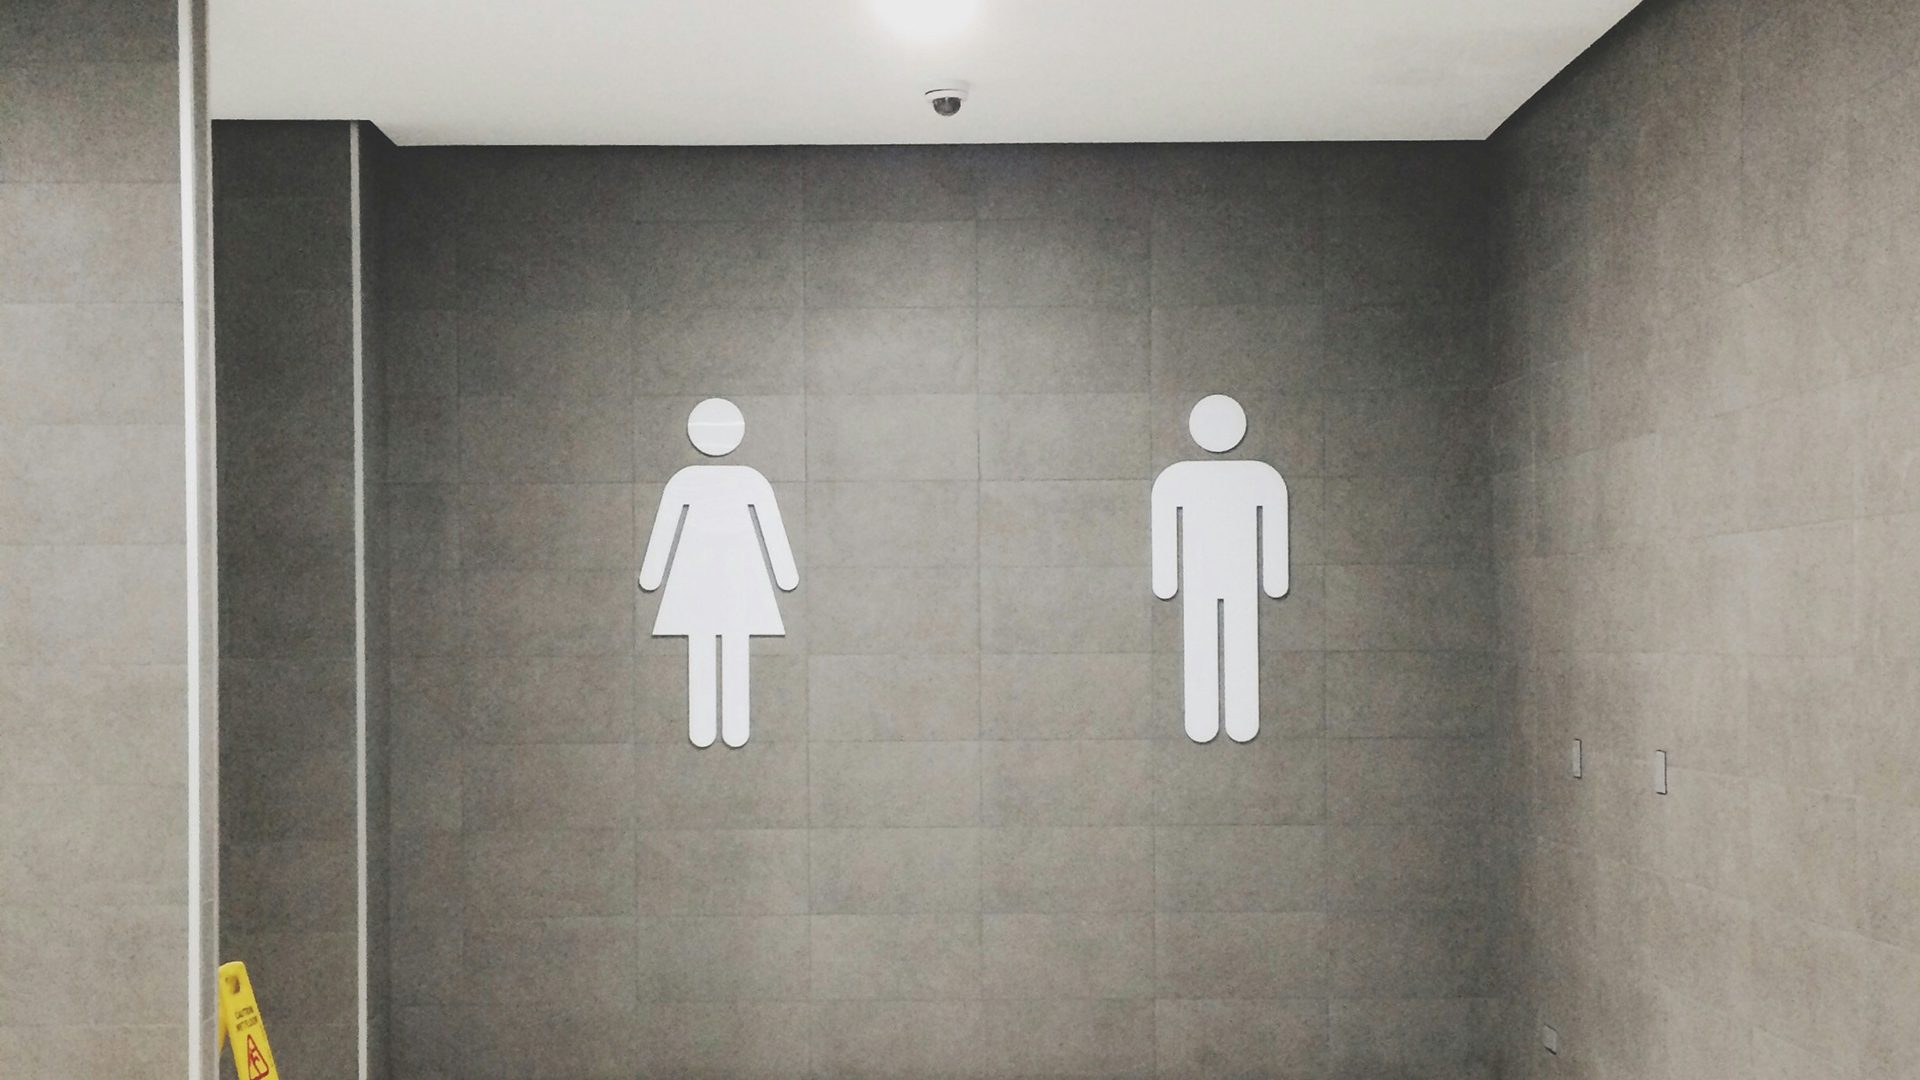 Signage indicating women's and men's restrooms